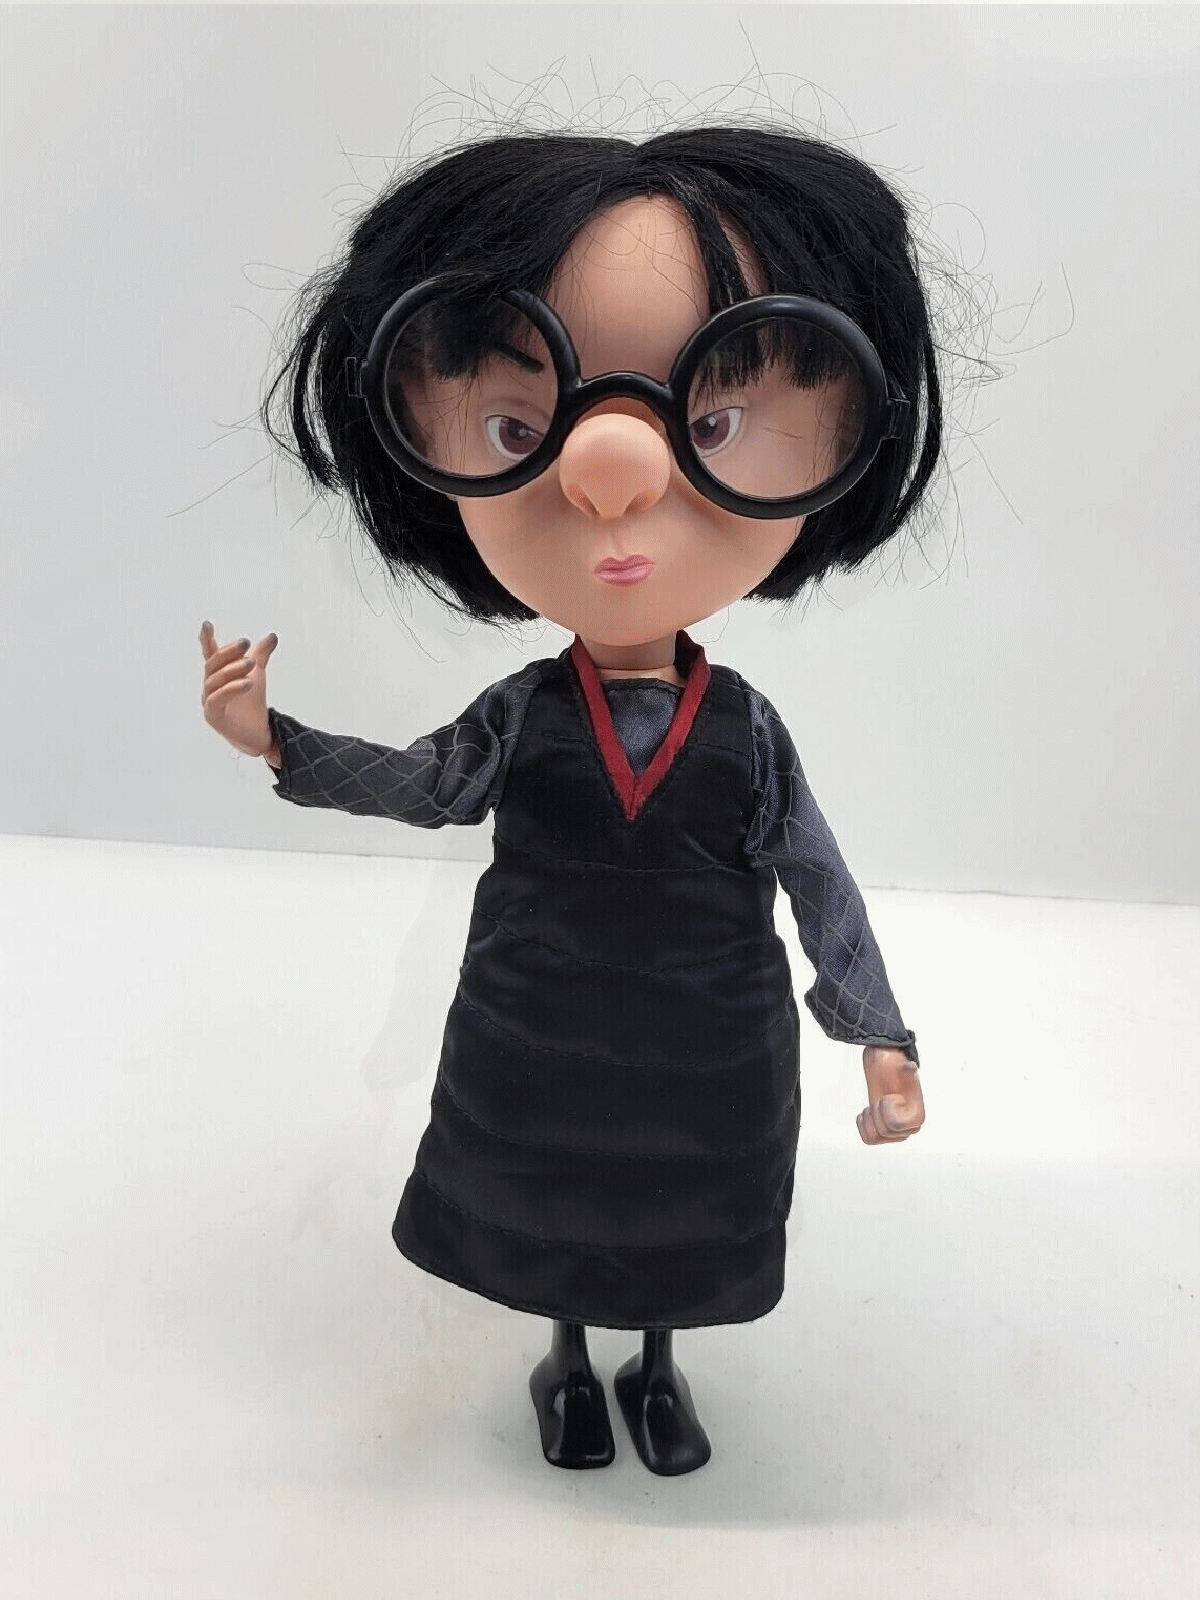 Disney Pixar Incredibles Edna Mode Doll Interactive With Fashion Recognition 13" - $24.99